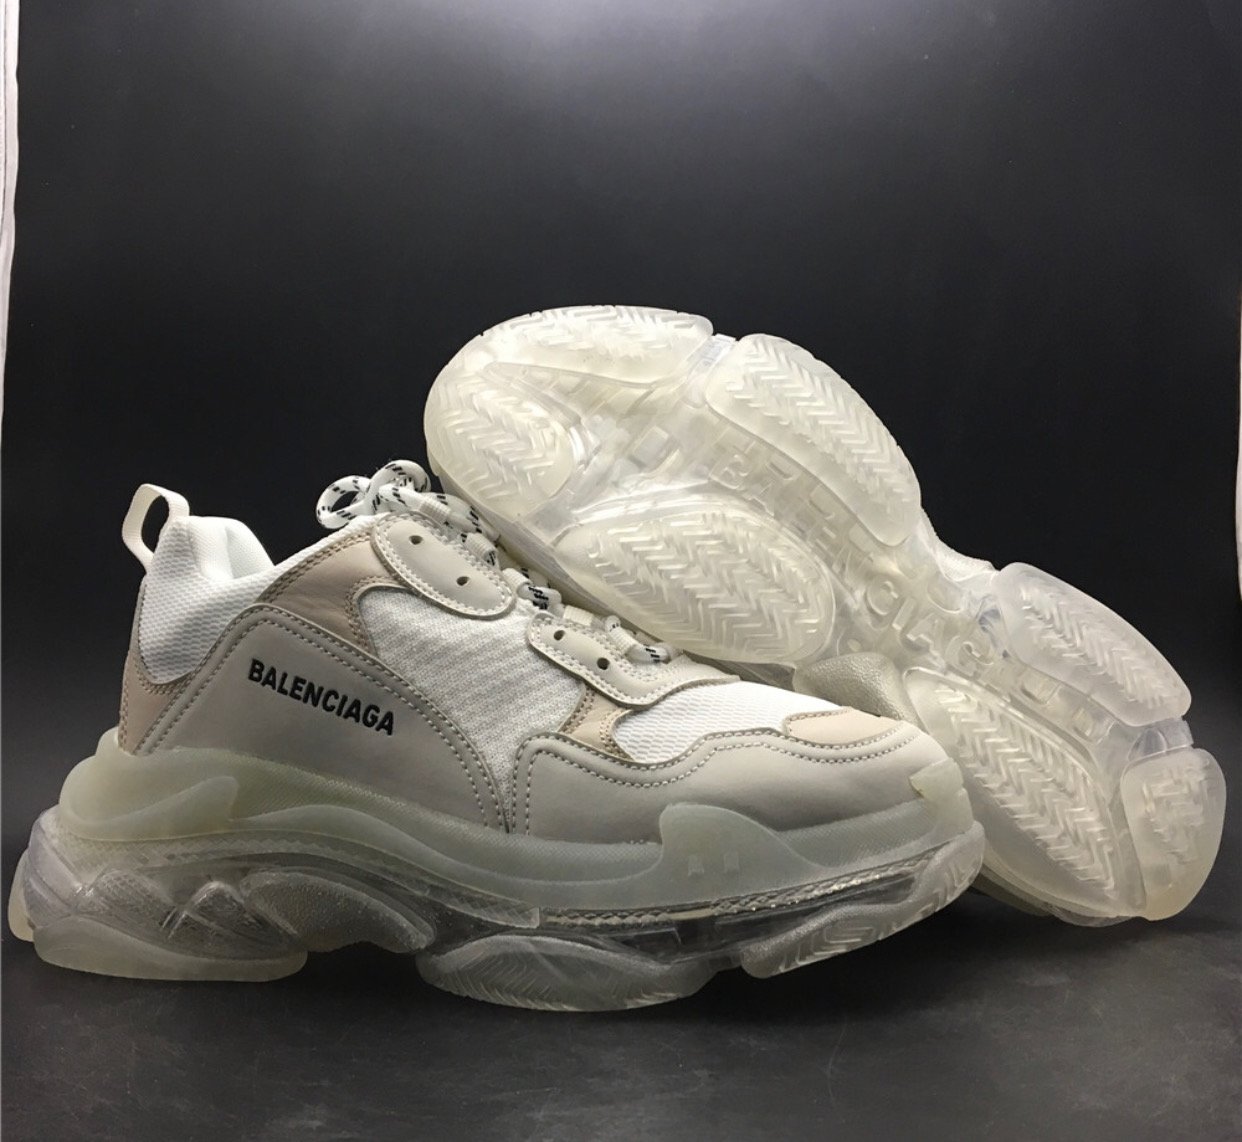 All The Balenciaga Triple S Sneakers Ugly Miami Wakeboard